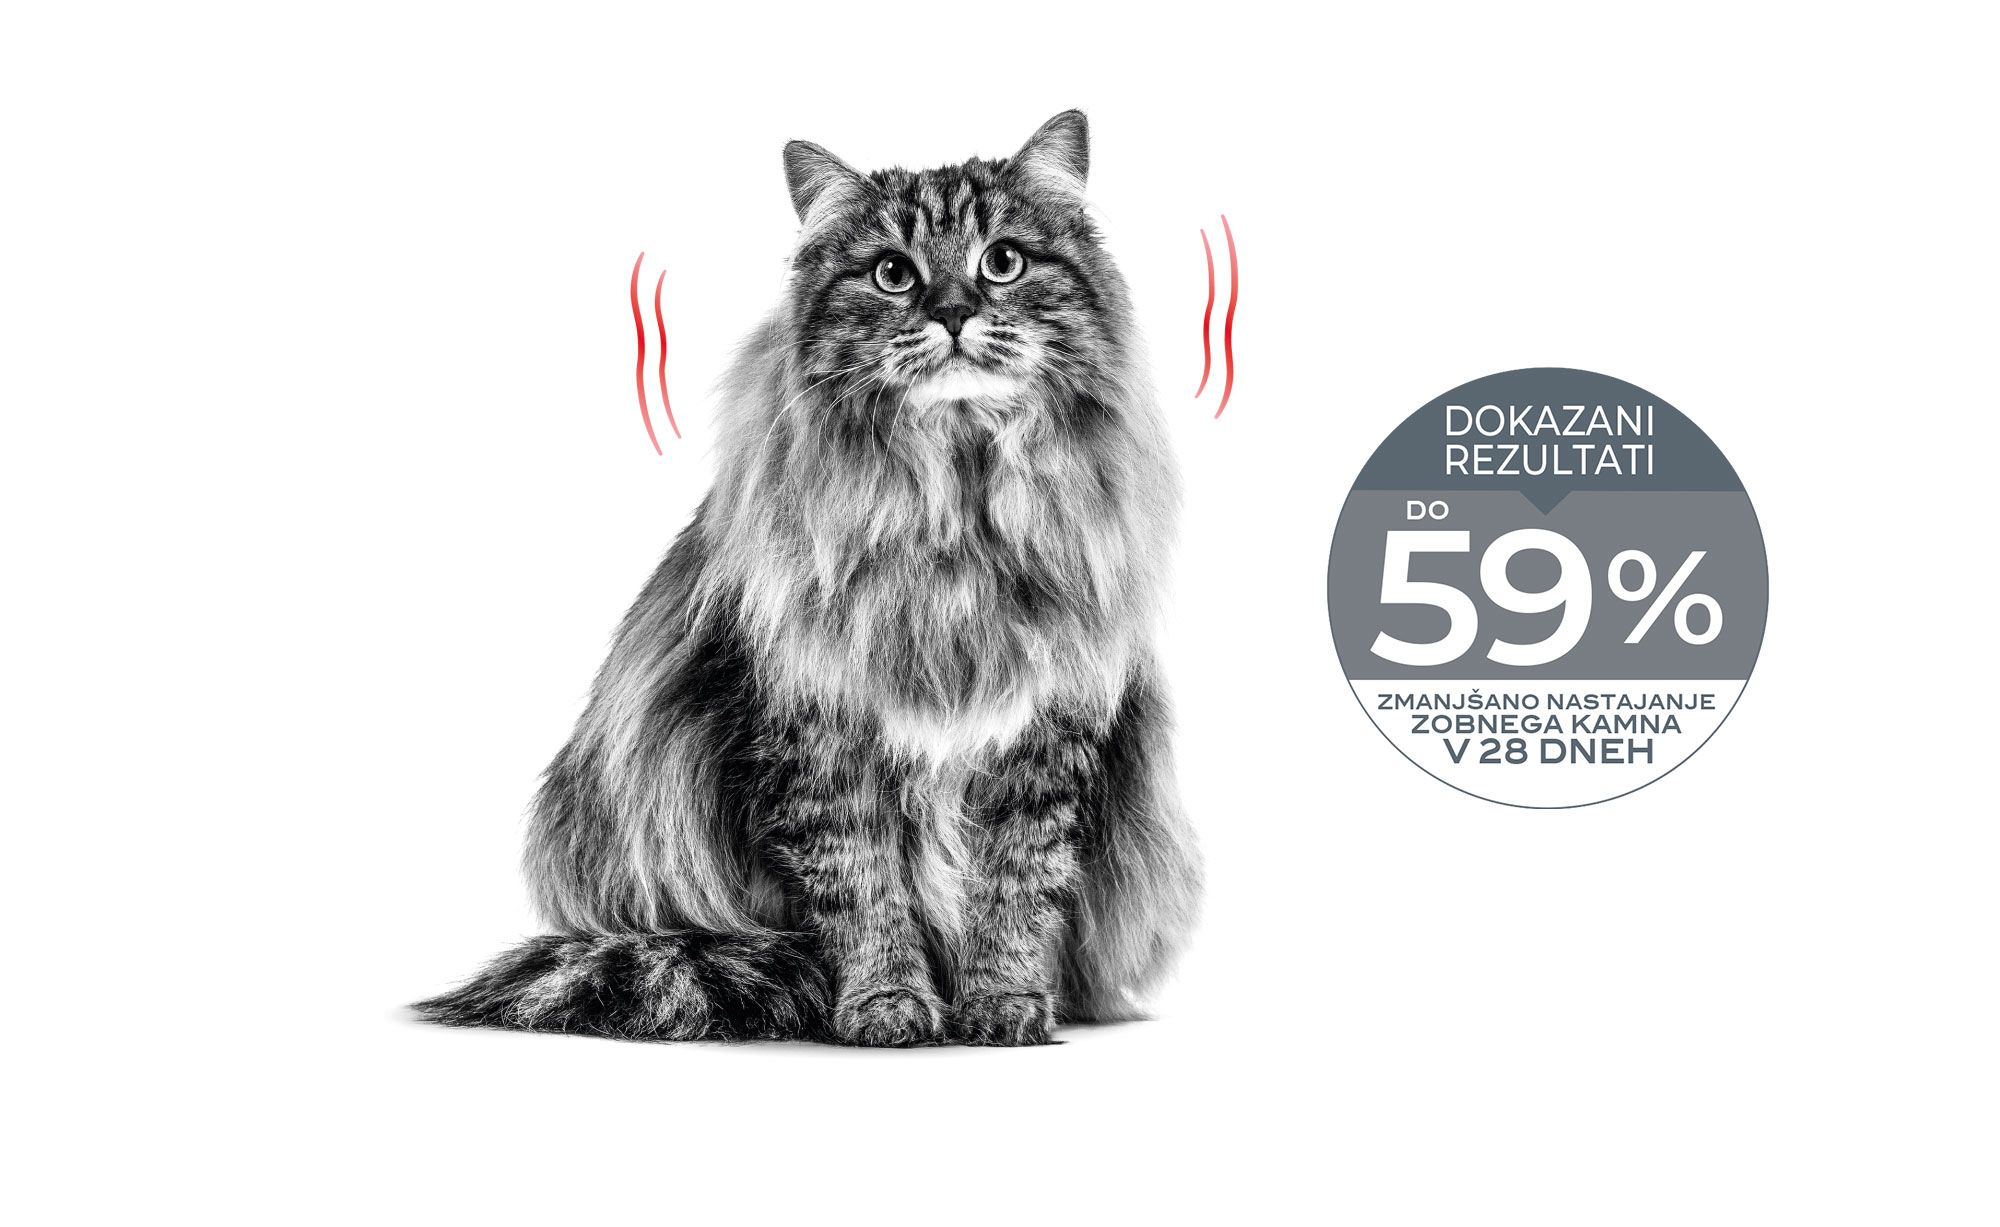 Emblematic of cat with dental sensitivity and associated proven results